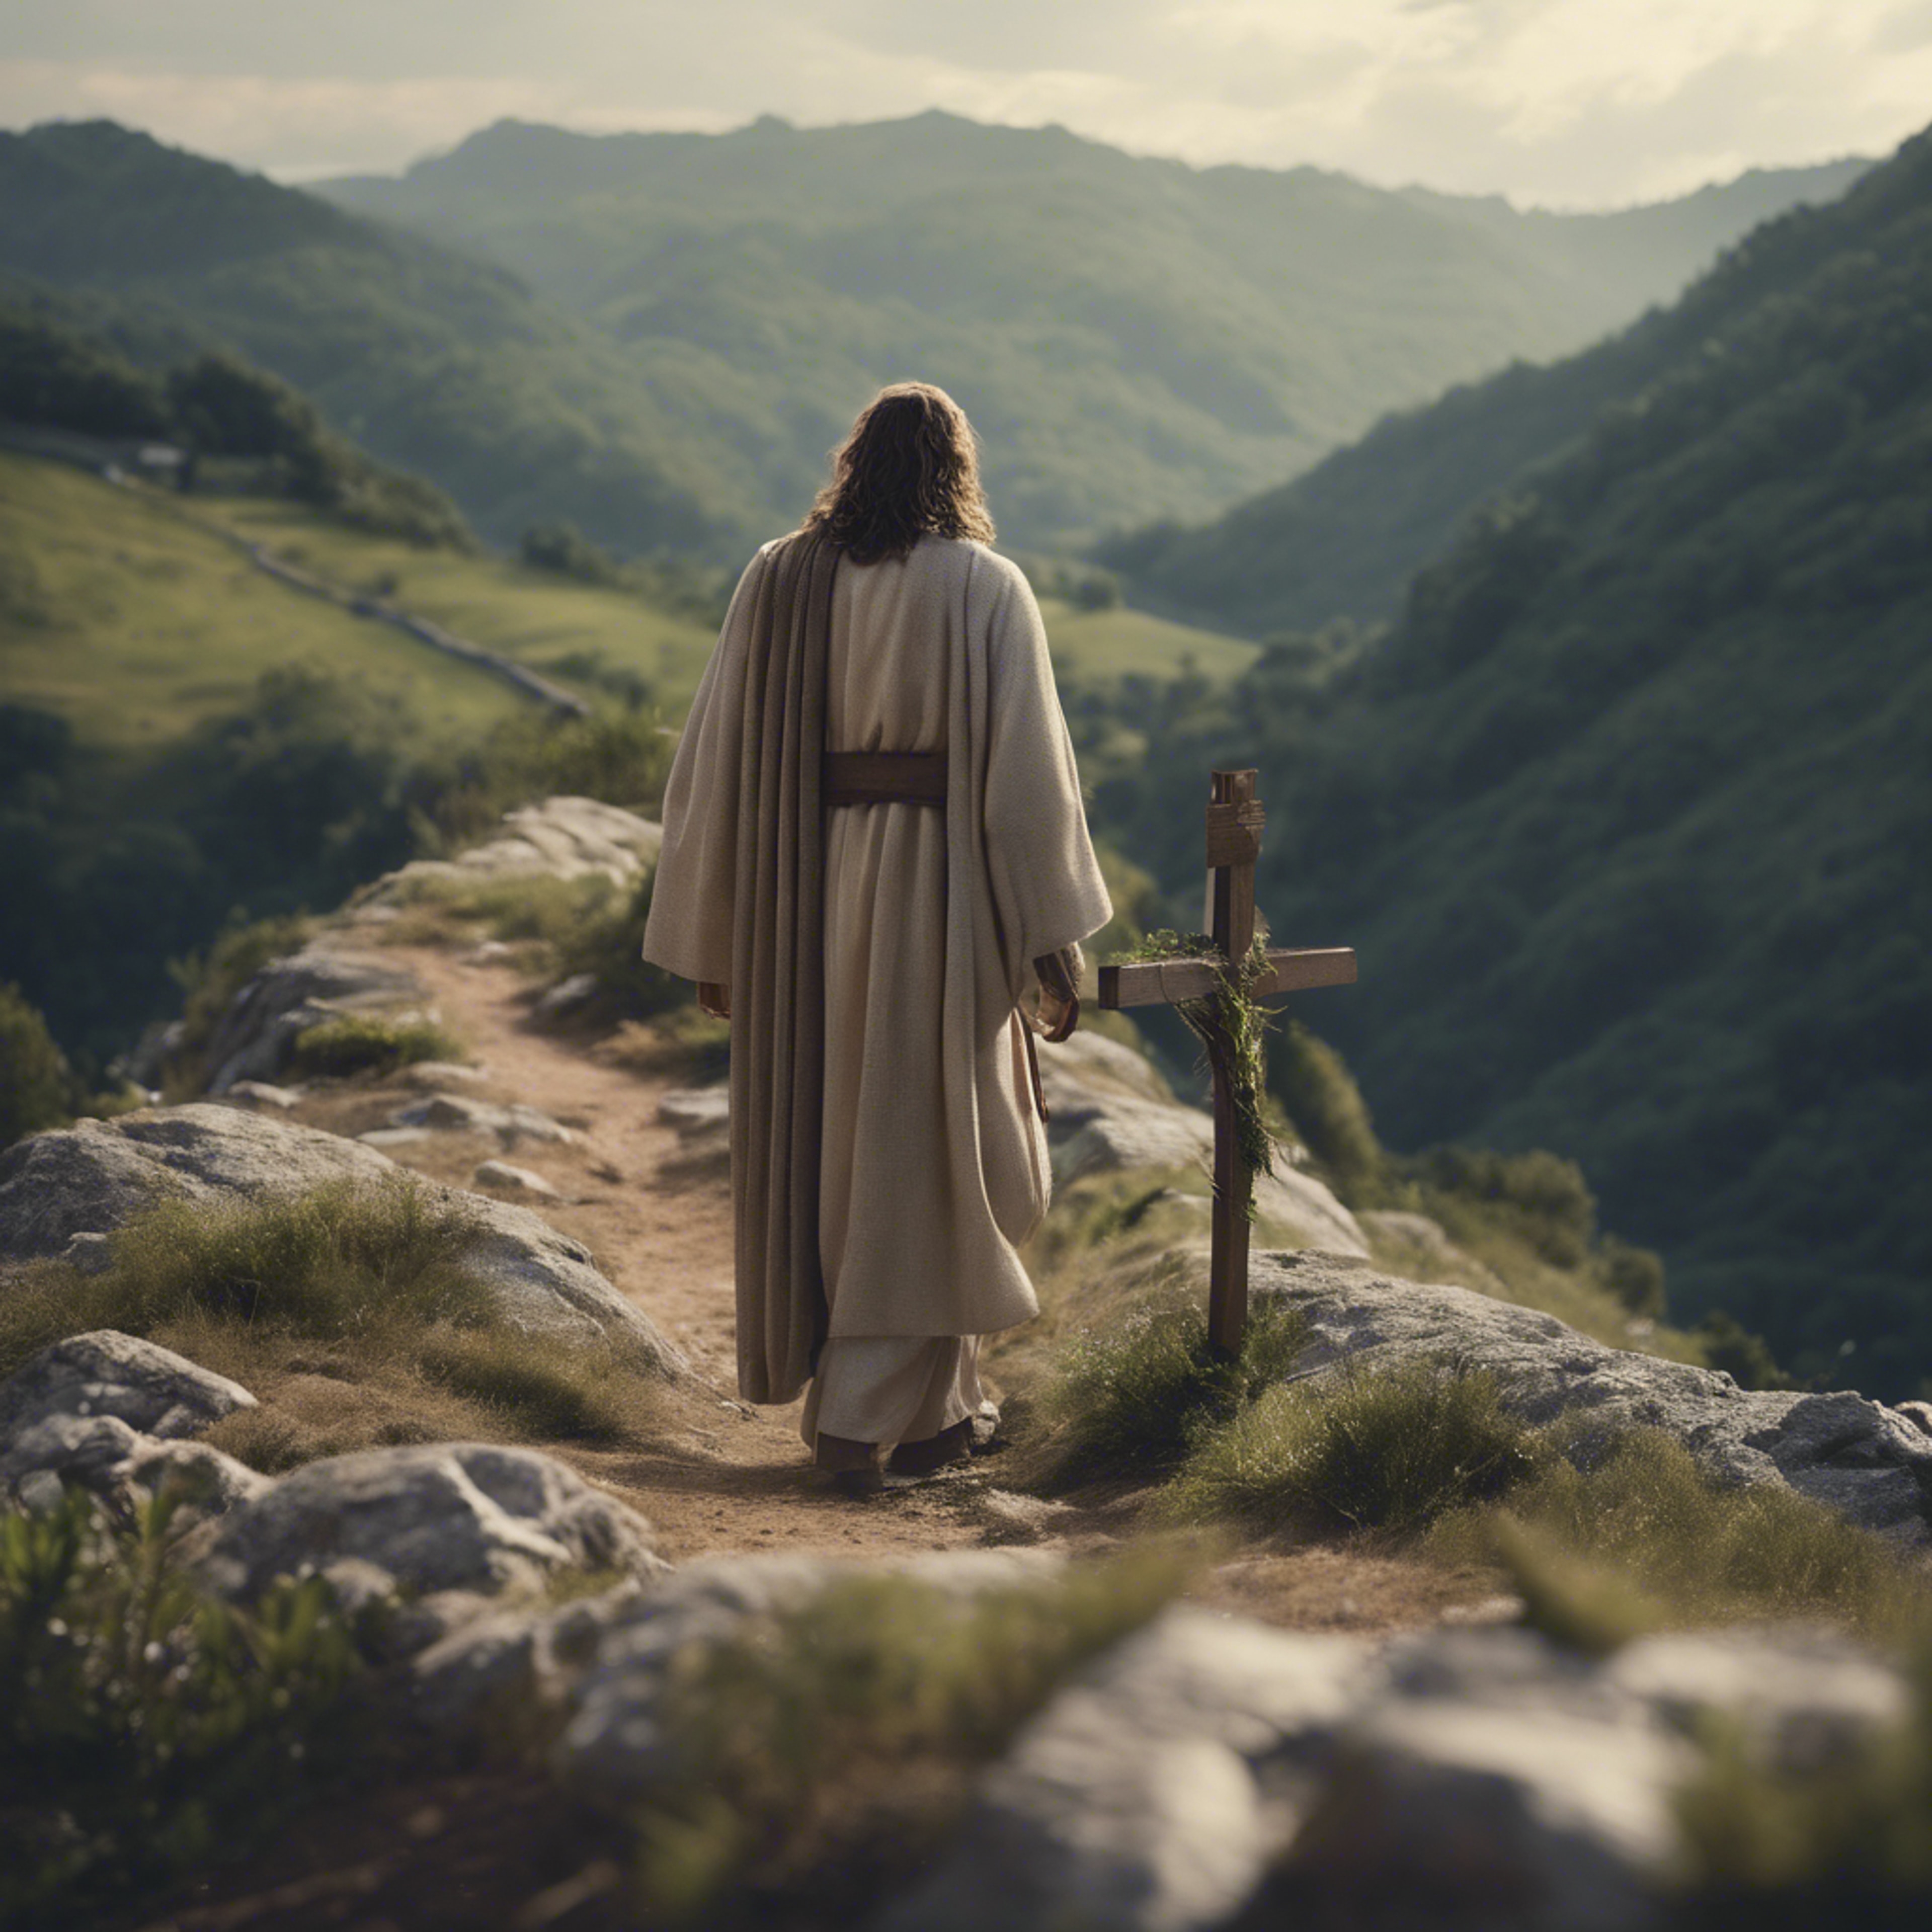 A somber yet inspiring scene of Jesus carrying the cross along a winding mountain path. Ფონი[cec6dd957e1b48d0bb97]